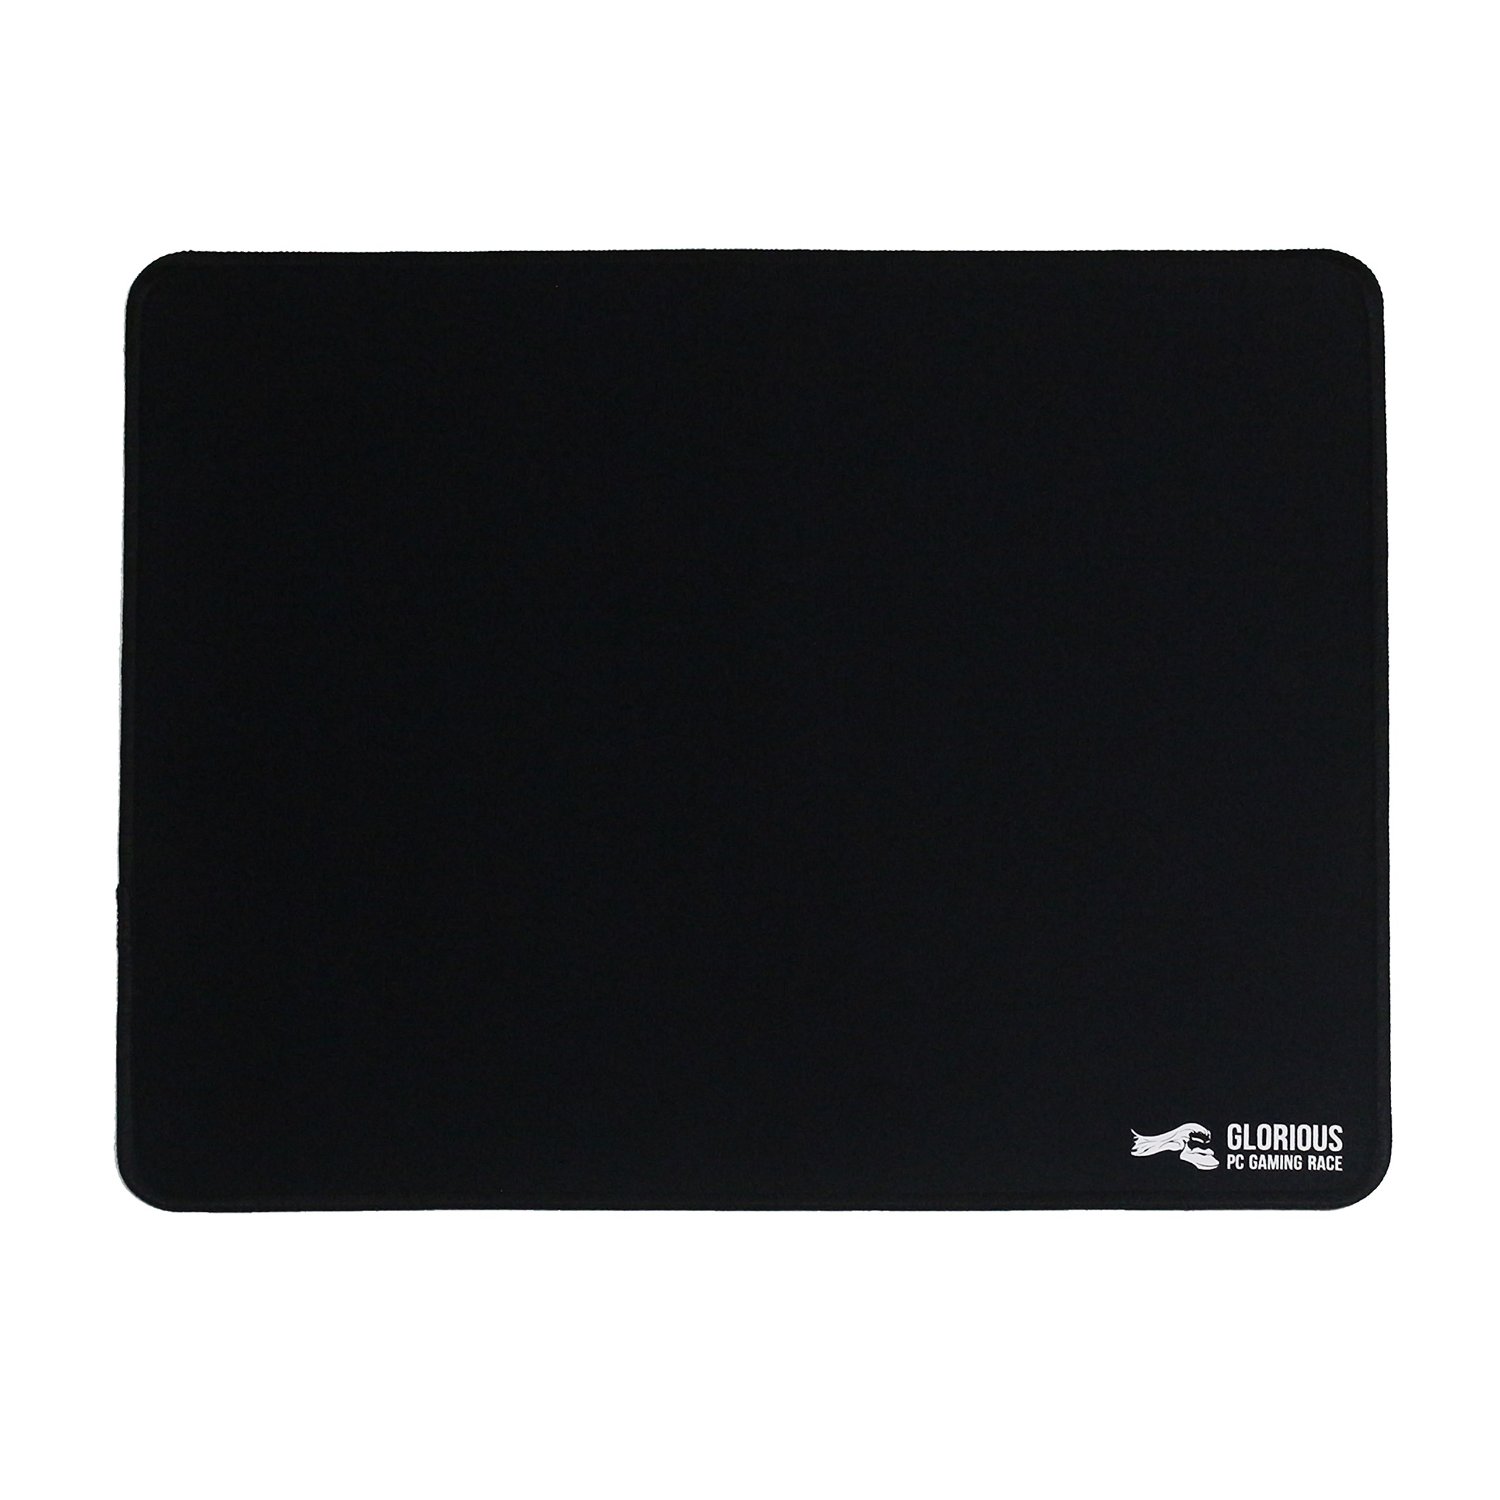 Glorious G-HXL Heavy Extra Large Pro Gaming Surface - Black 475x406x5mm